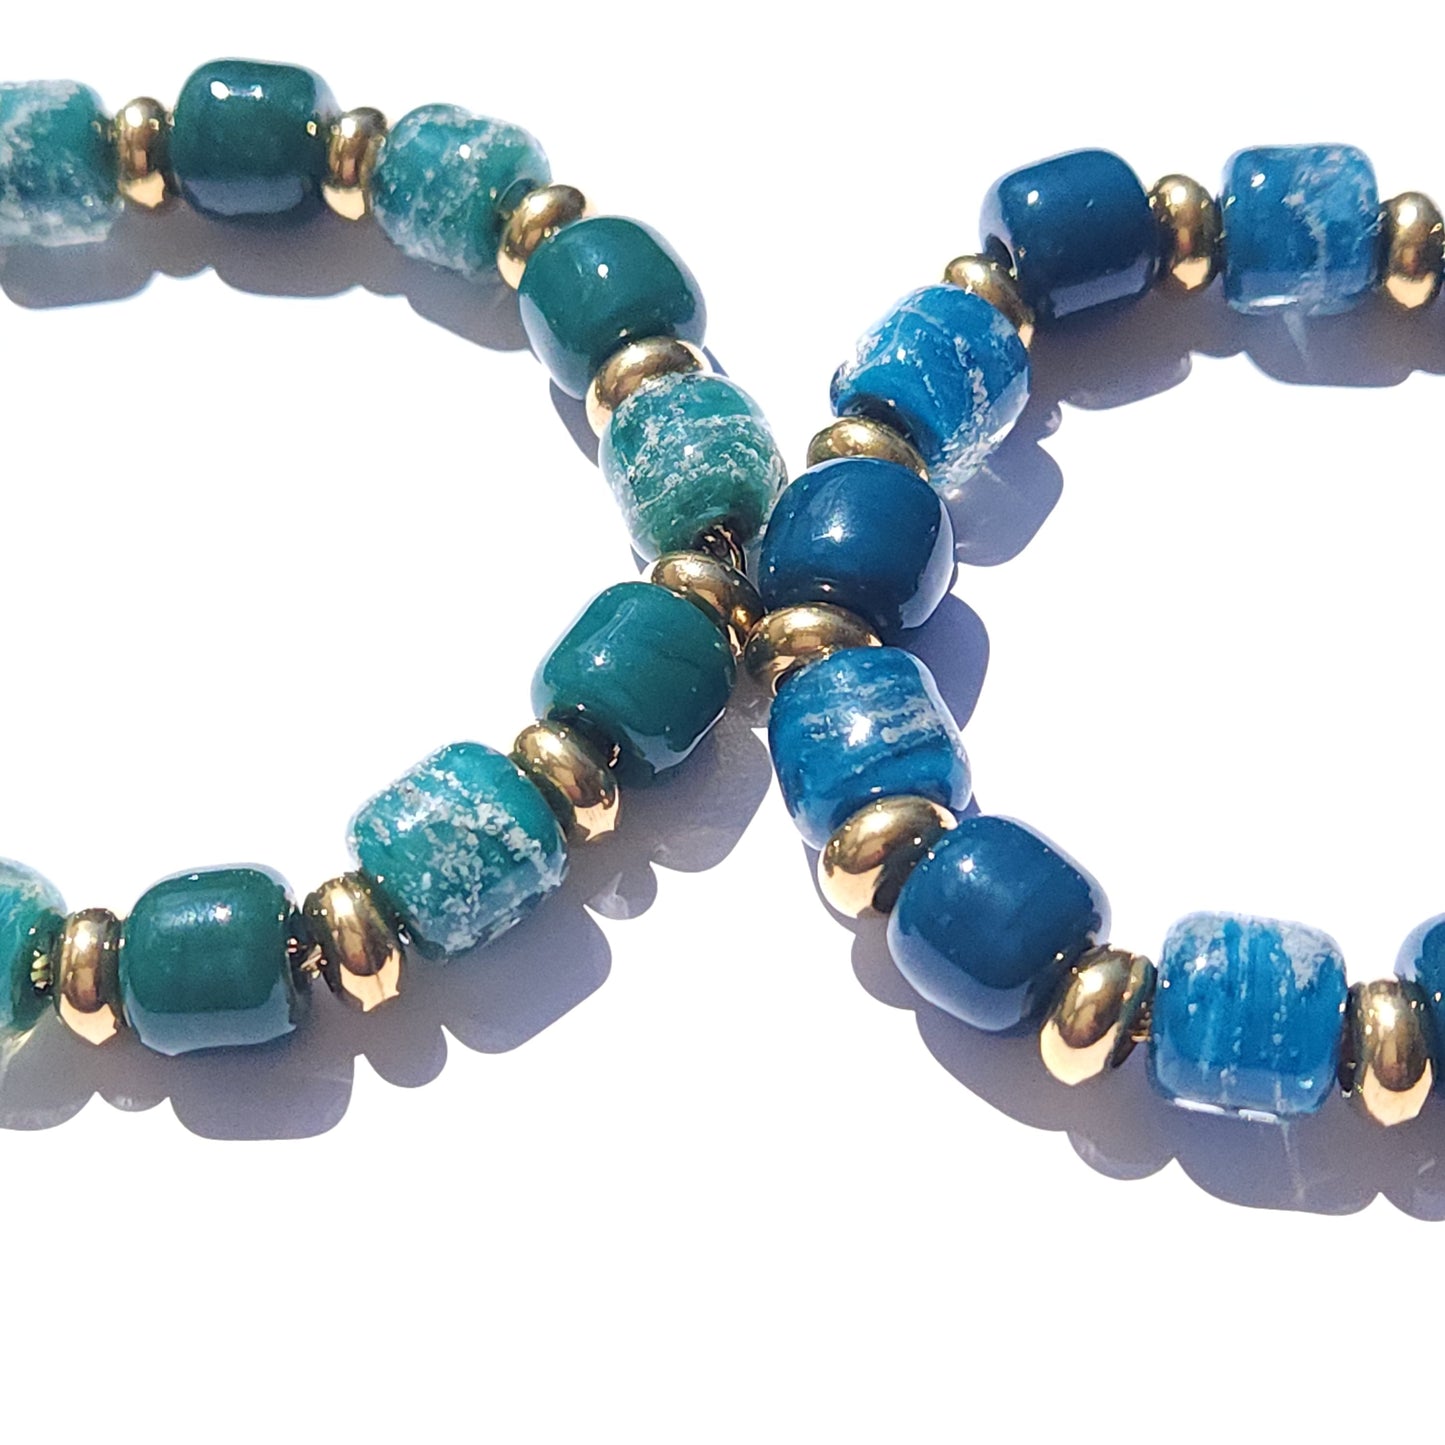 Eternal Bracelet with Cremation Ashes - Gold-Cremation Beads-DragonFire Glass-Ocean Blue-DragonFire Glass Cremation Jewelry